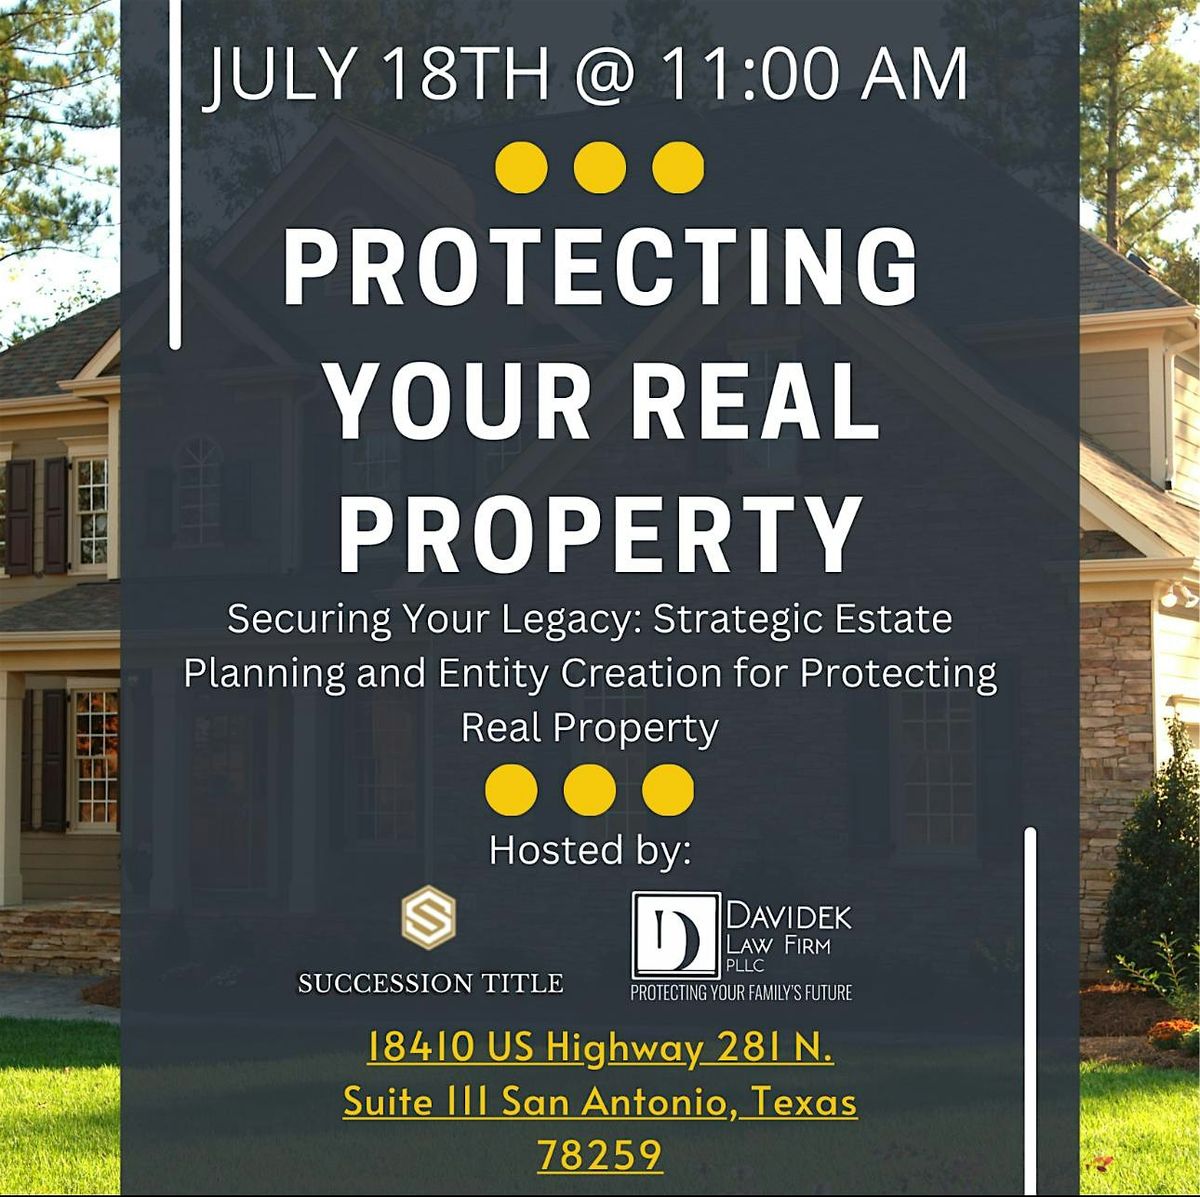 Protecting Your Real Property by The Davidek Law Firm